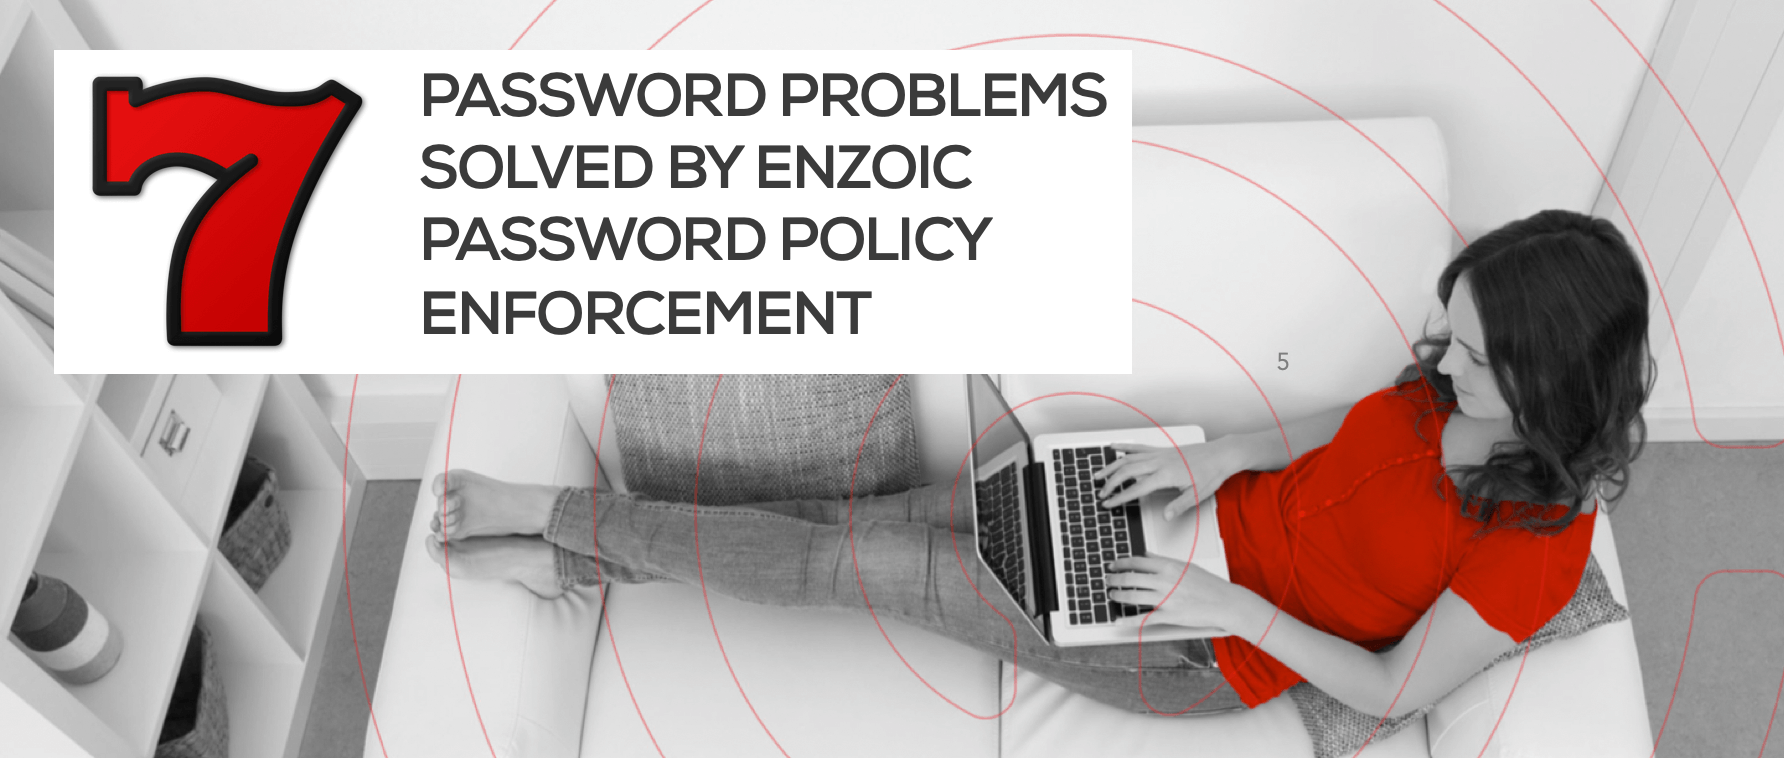 7 Password Problems Solved by Enzoic Password Policy Enforcement